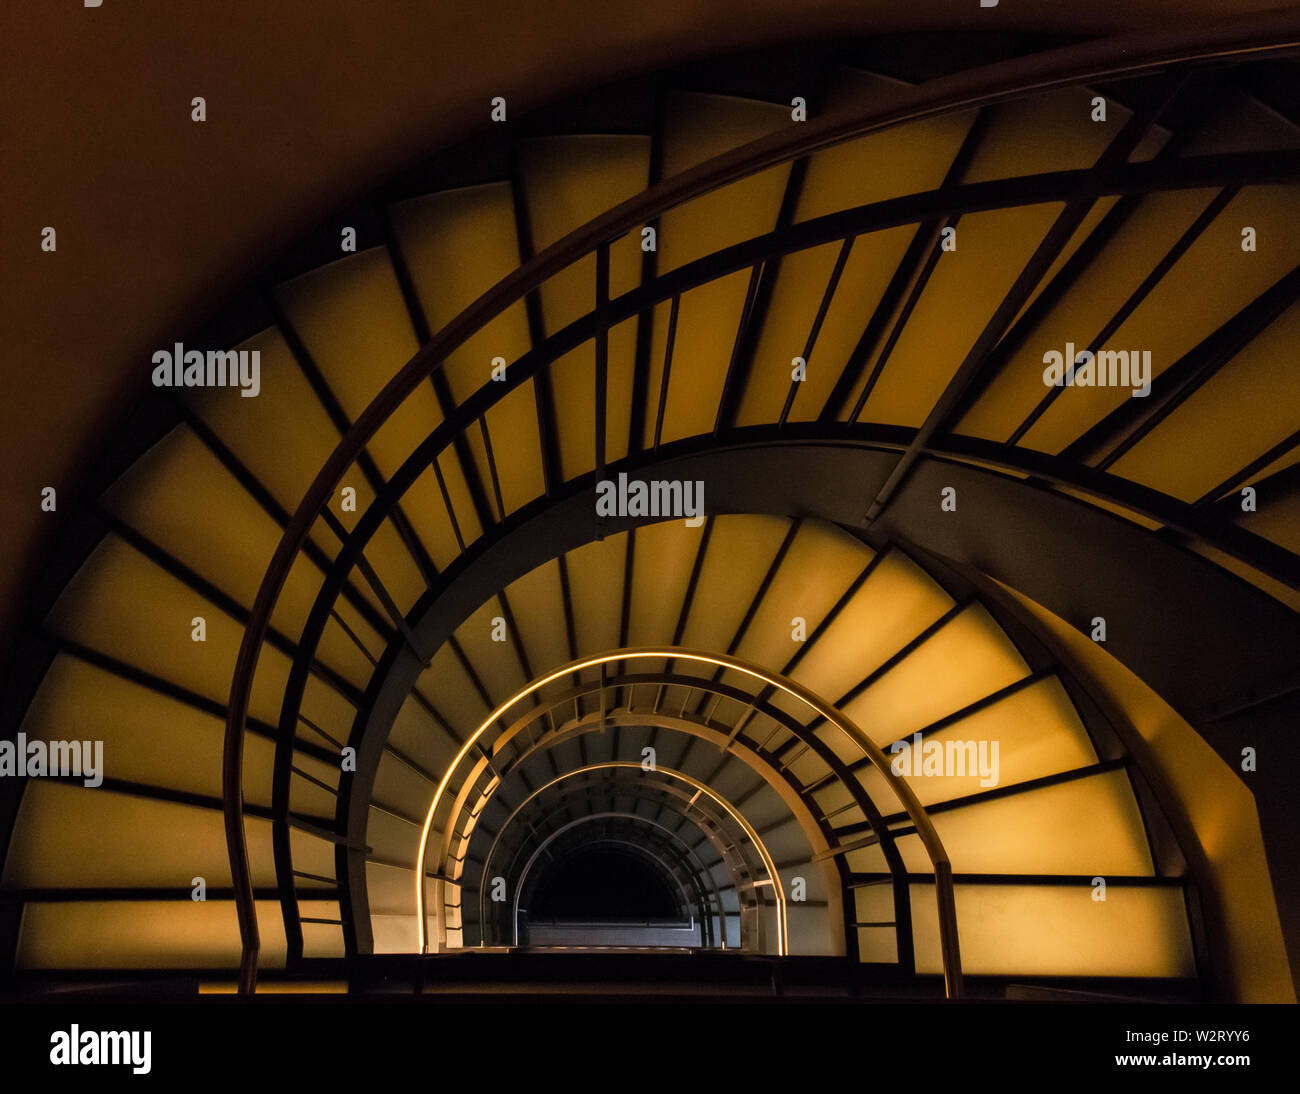 Spiral stairway from above at night Stock Photo